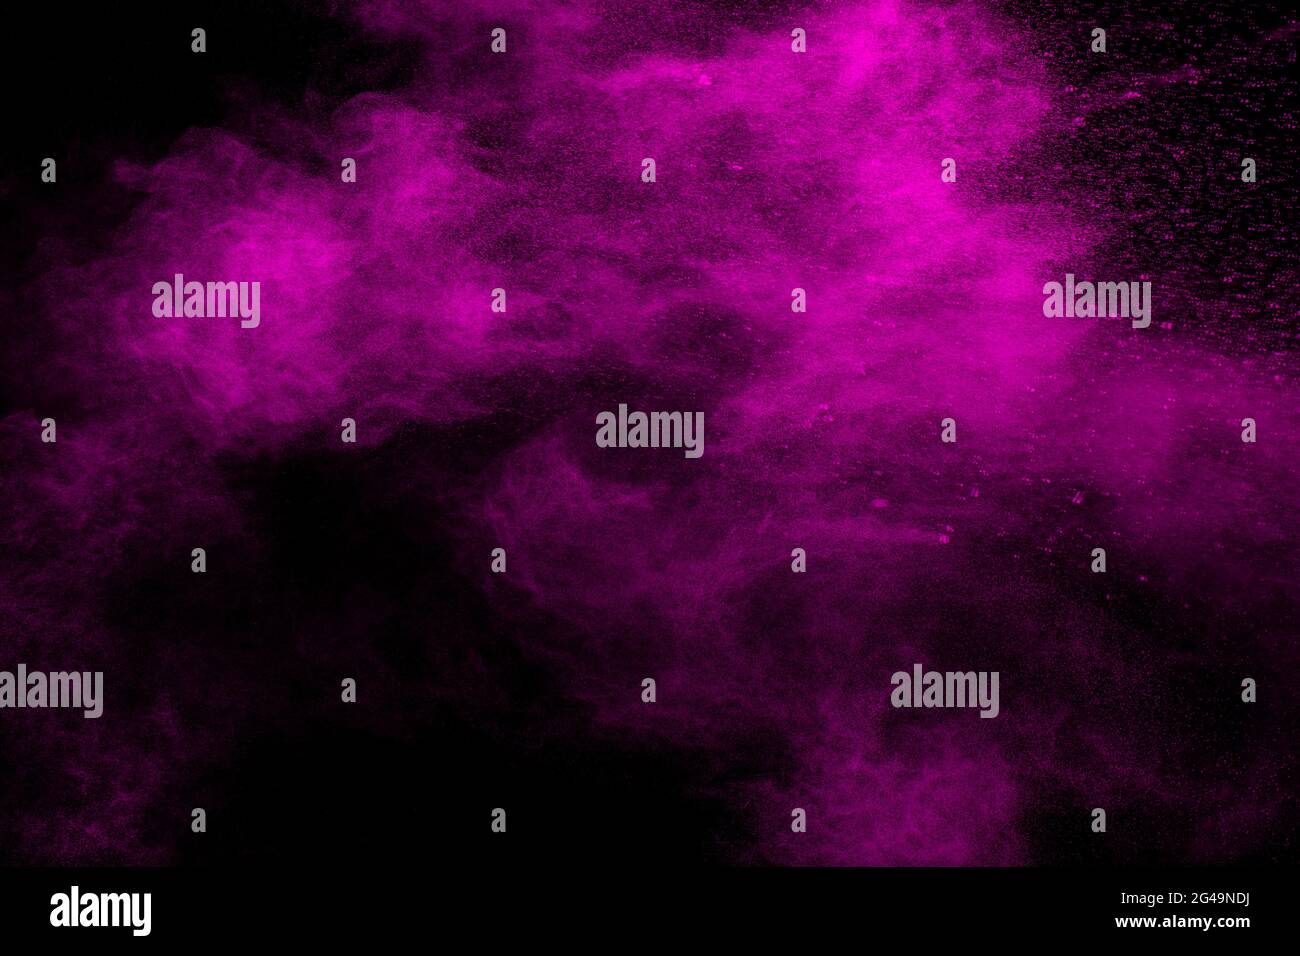 Abstract pink dust particles explosion on black background.Freeze motion of pink powder splash. Stock Photo